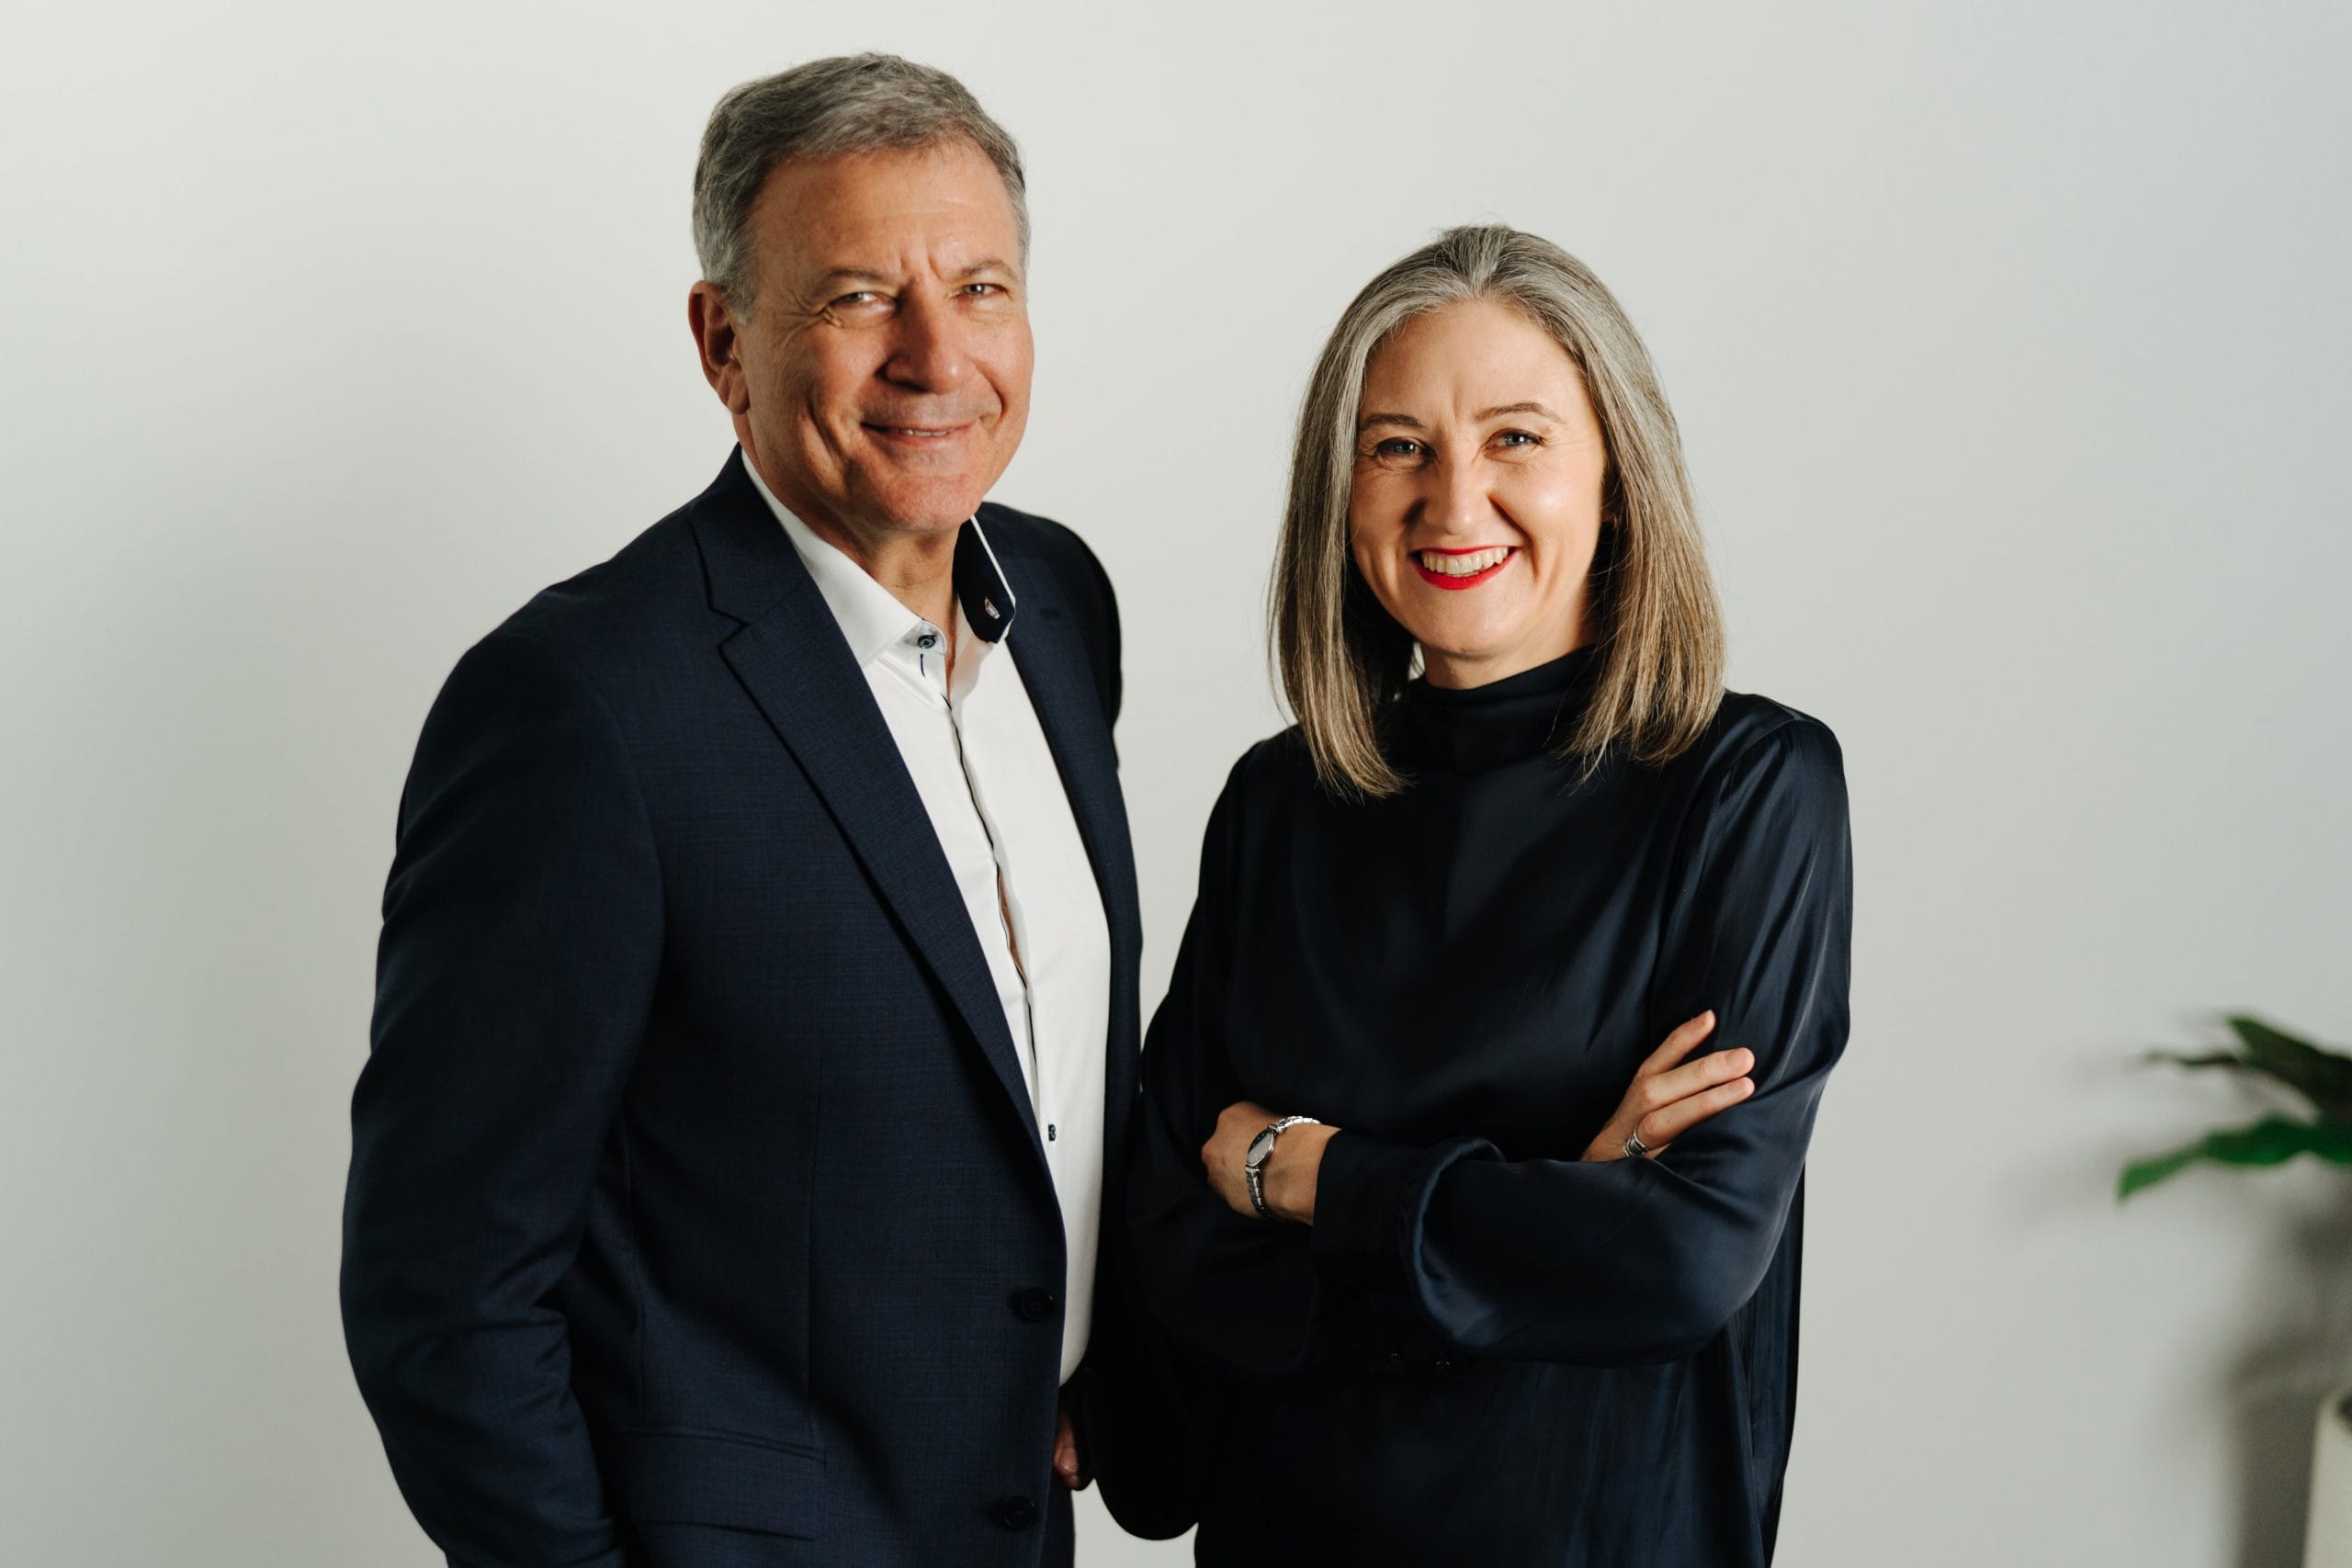 Liberated Leaders co-founders and head leadership coaches Paula and Tony share their mission to help businesses and teams re-invent themselves.